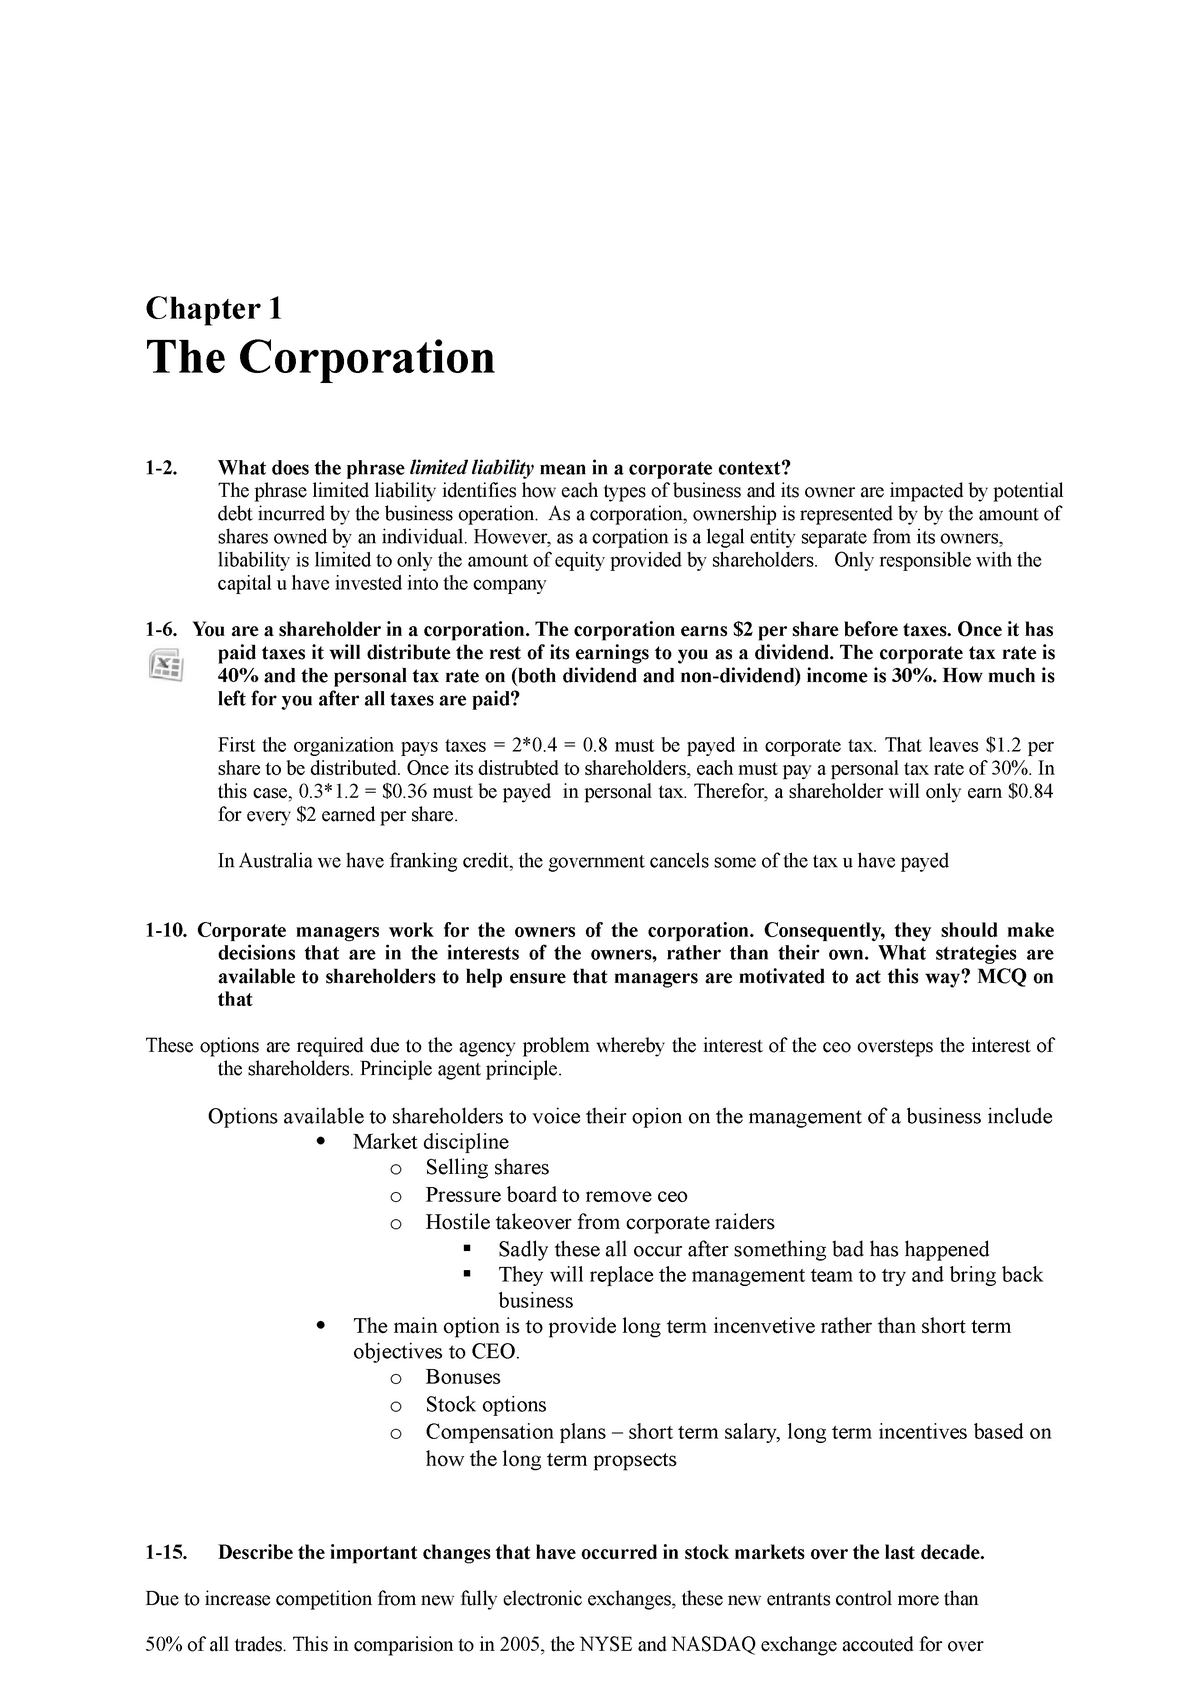 tutorial-1-questions-chapter-1-the-corporation-1-2-what-does-the